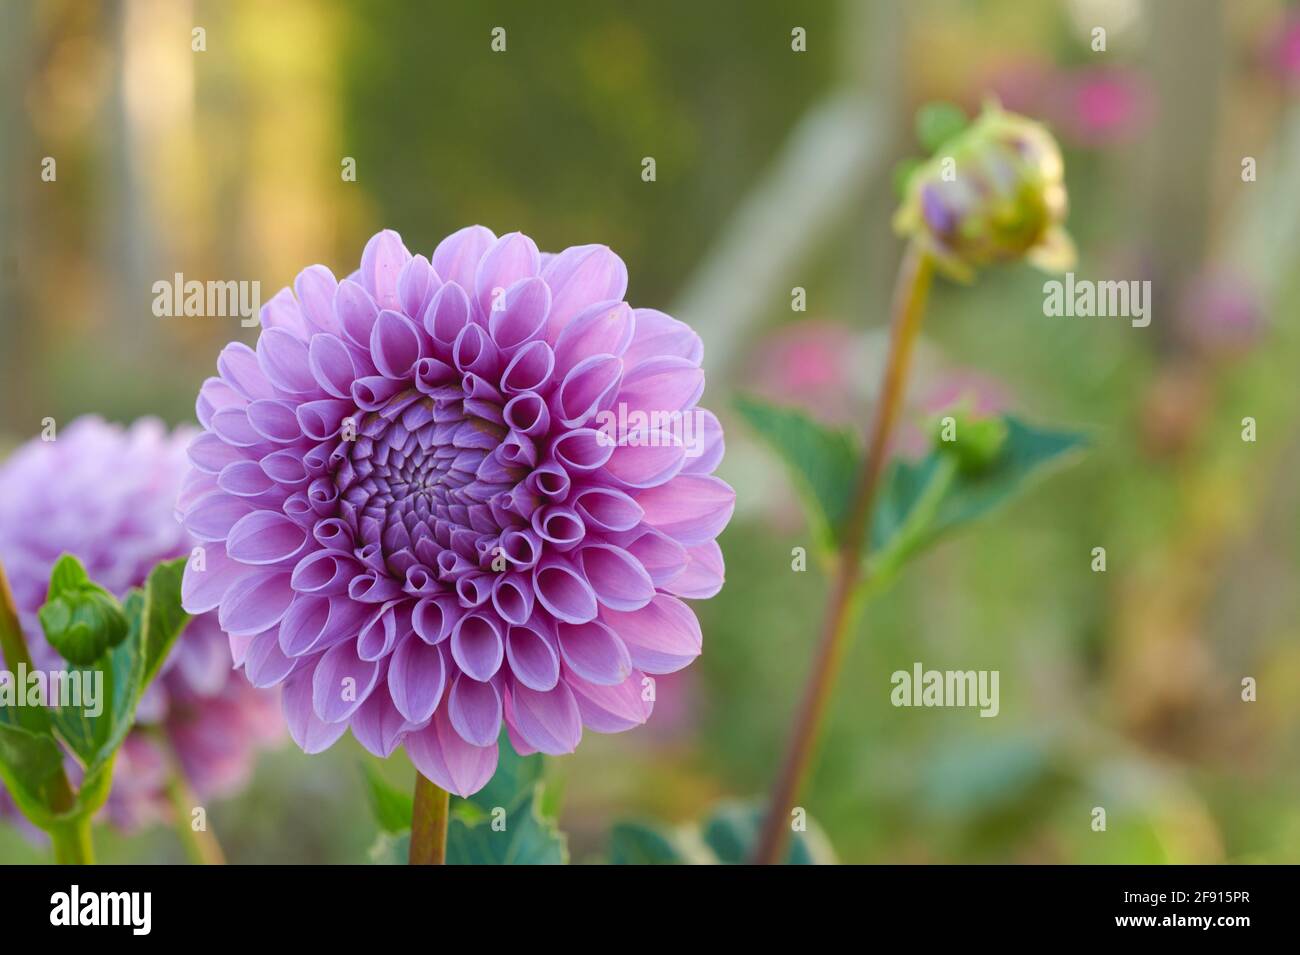 Close up of a clear mauve ball style dahlia flower. Early morning light growing in a garden. Bloom still opening. Stock Photo